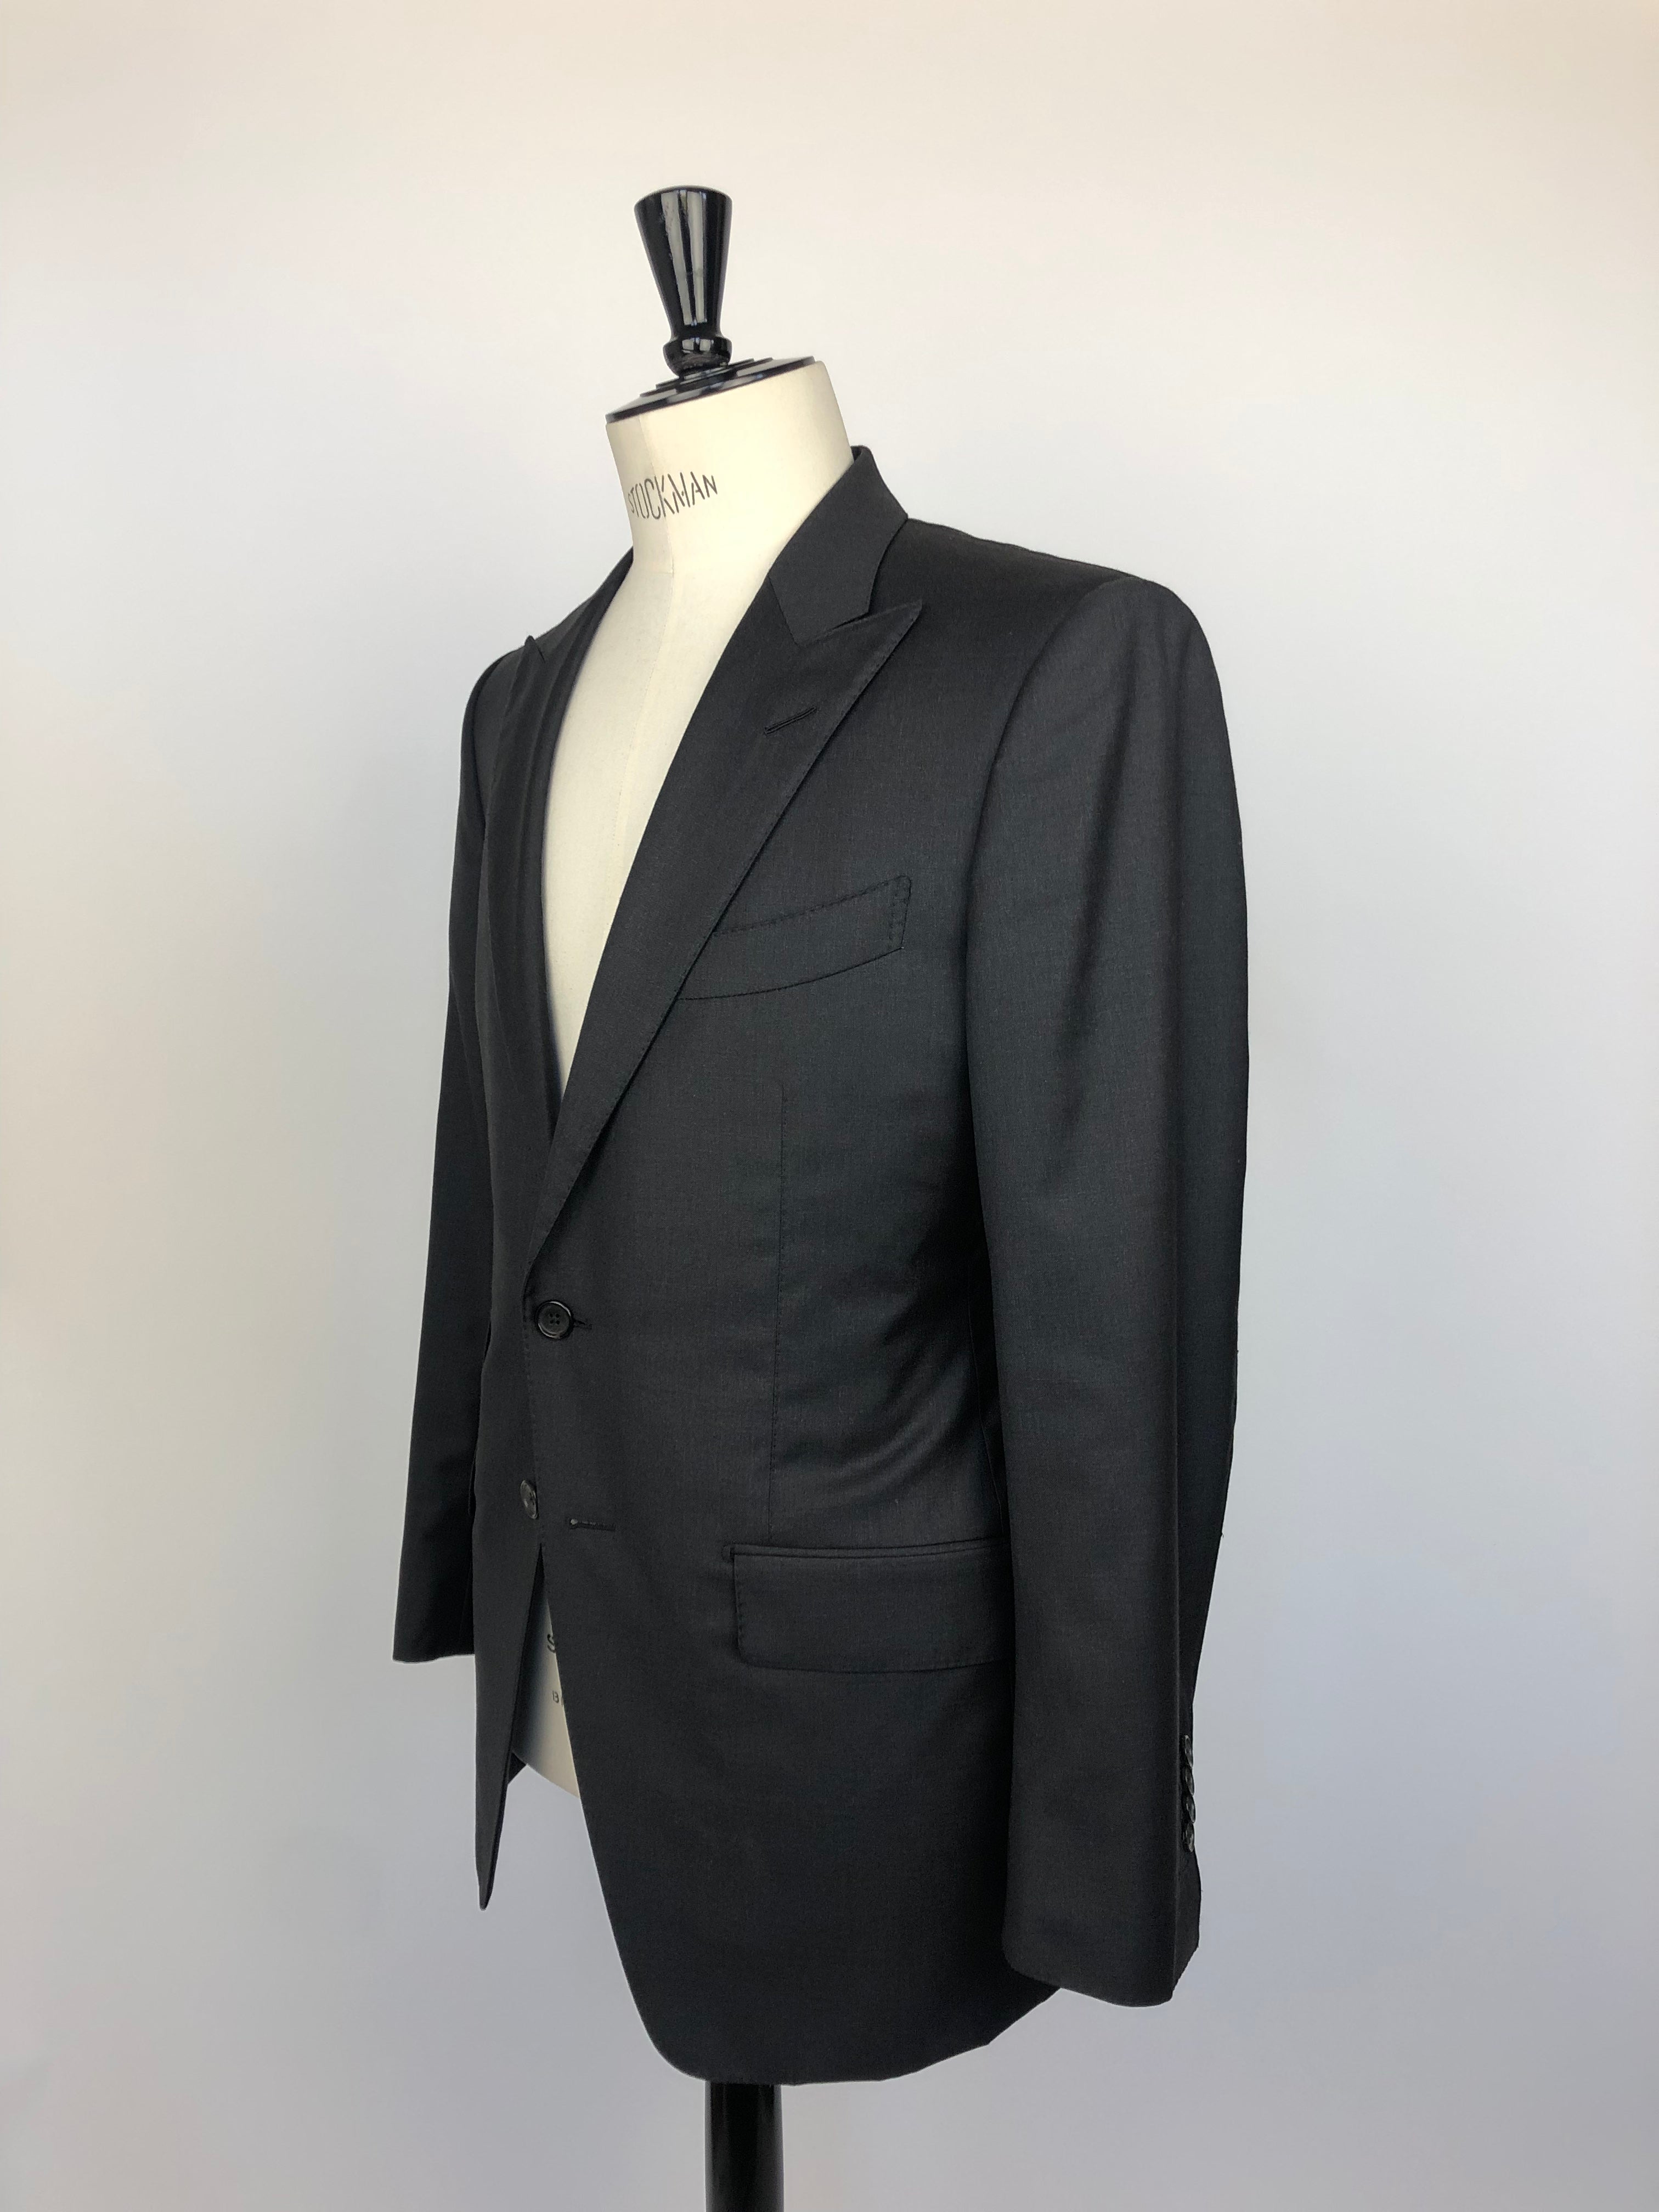 Tom Ford Grey Suit